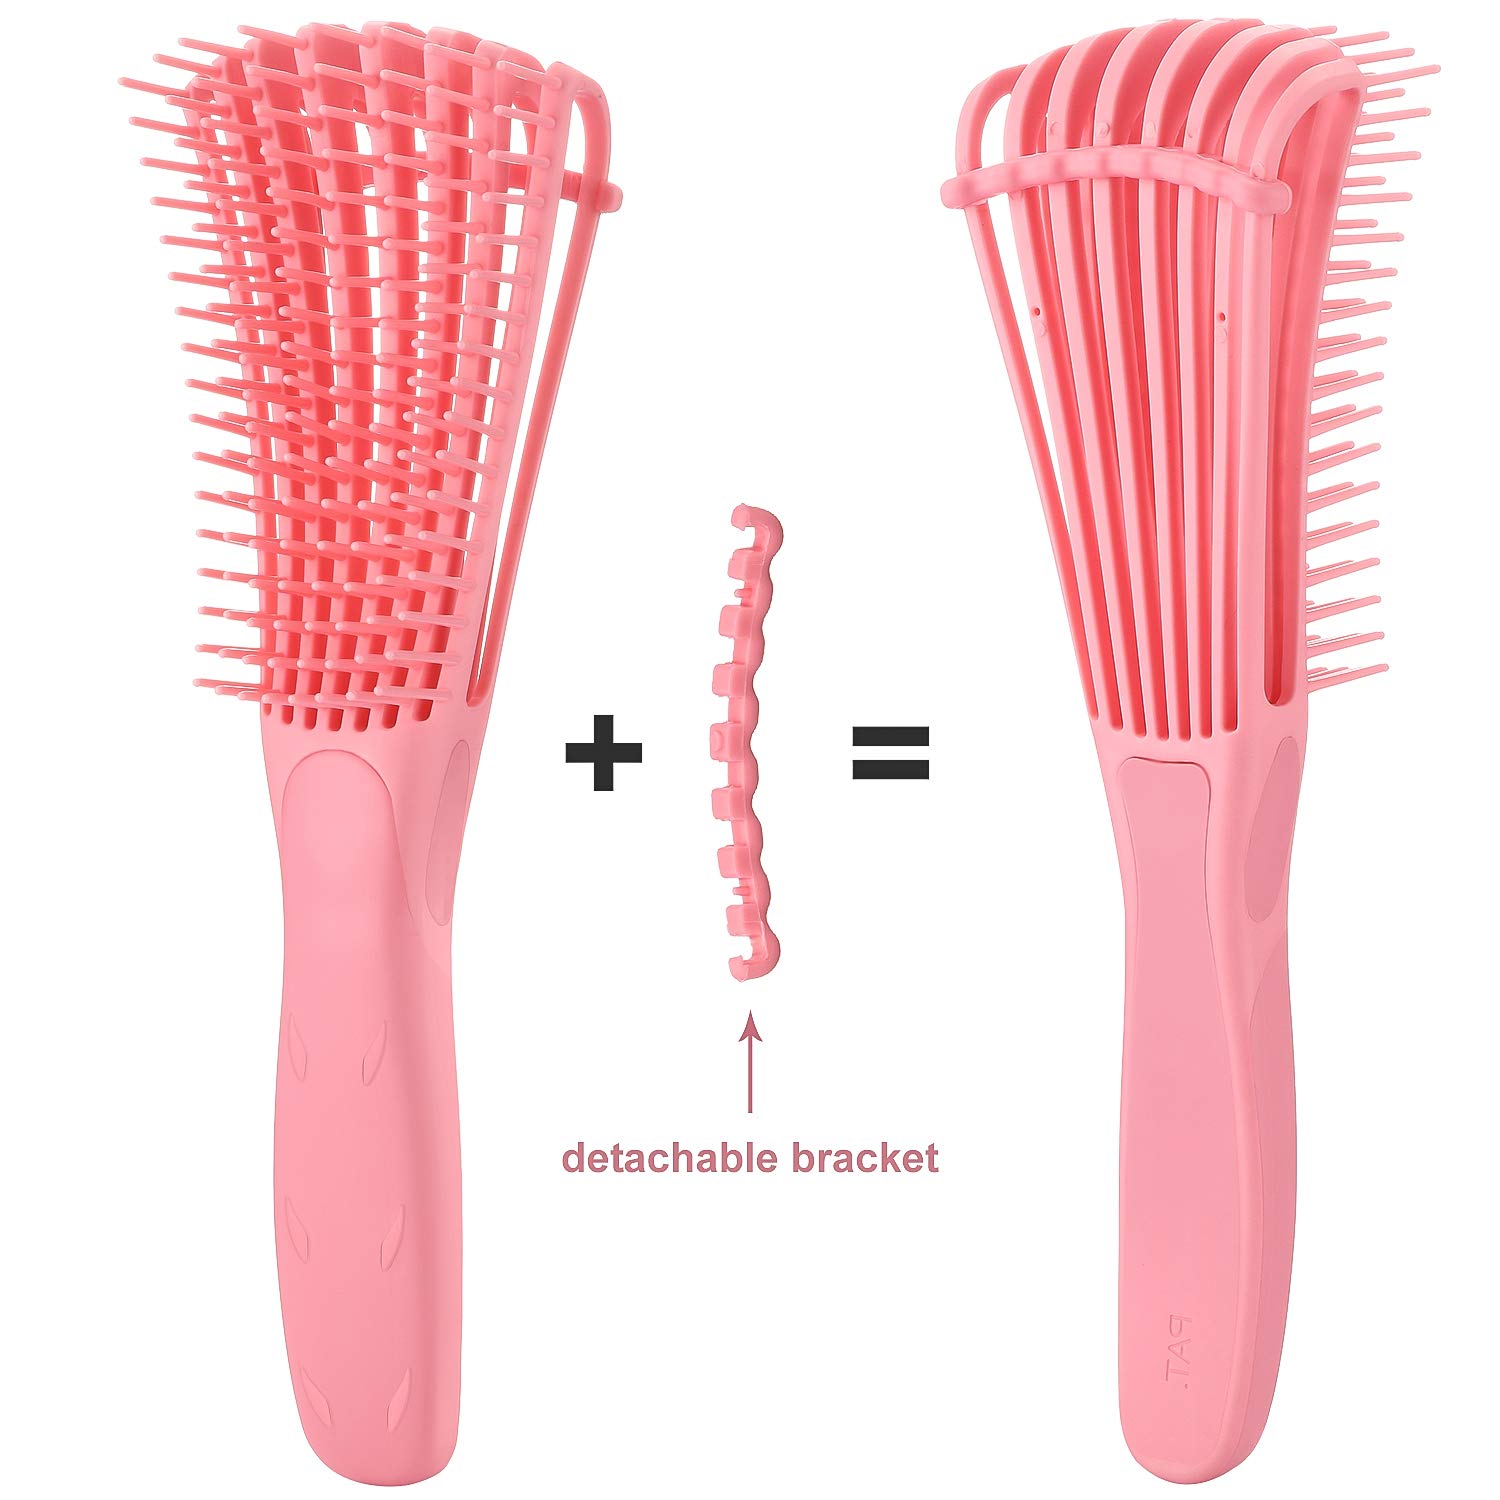 2 Pack Detangling Brush for Curly Hair, ez Detangler Brush Hair Detangler, Afro Textured 3a to 4c Kinky Wavy for Wet/Dry/Long Thick Curly Hair, Exfoliating for Beautiful and Shiny Curls (Green, Pink)